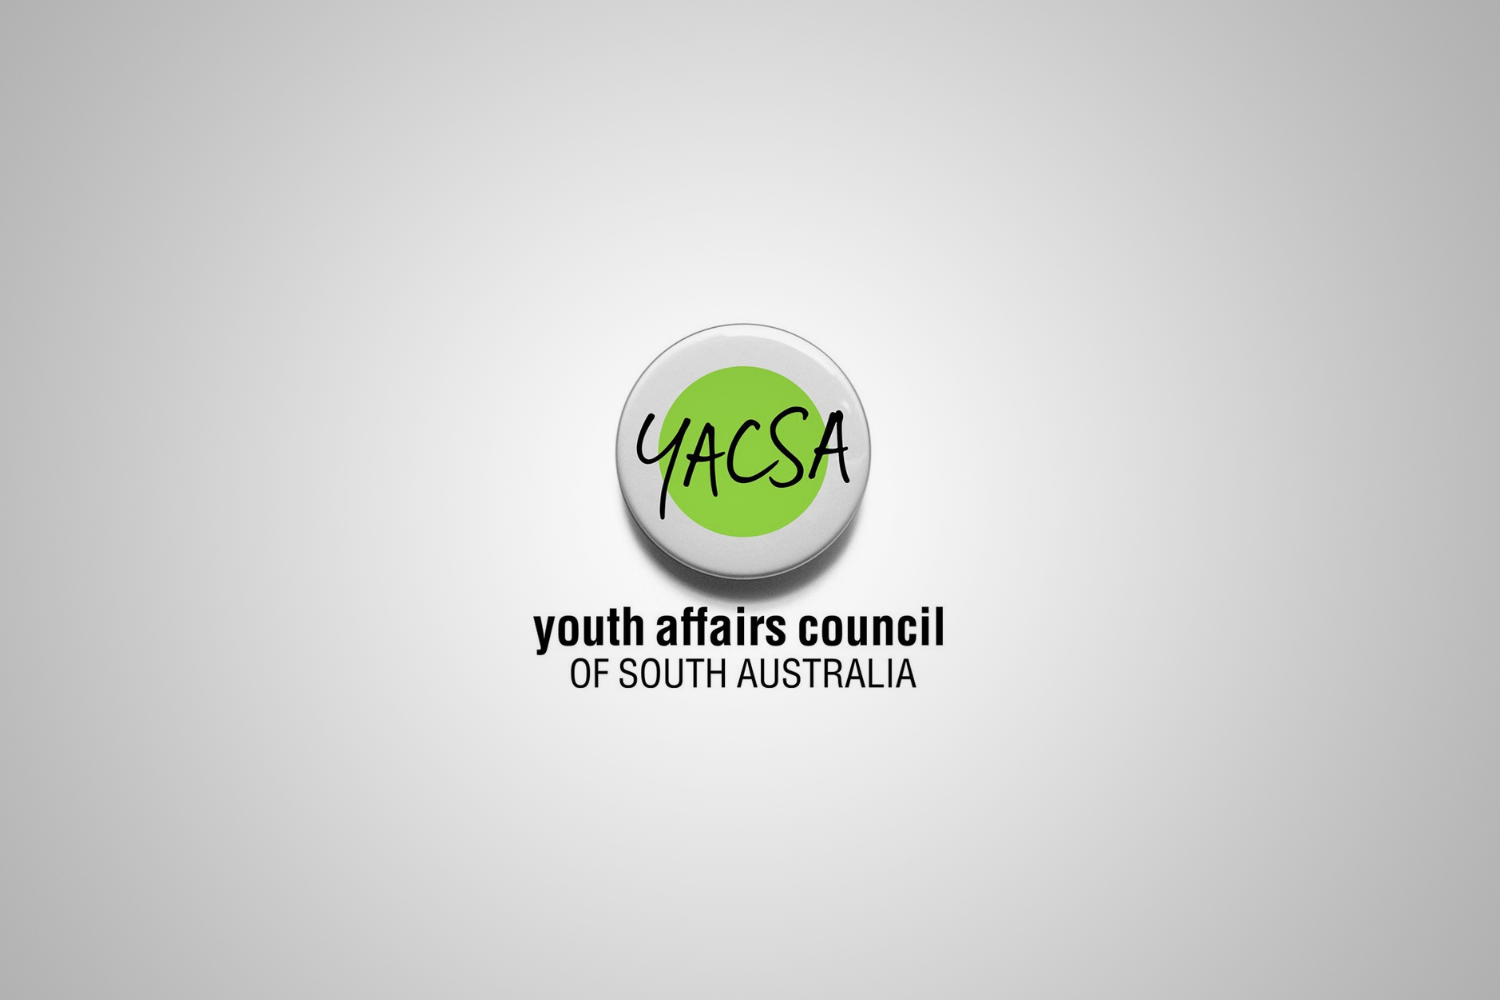 Youth Affairs Council of South Australia